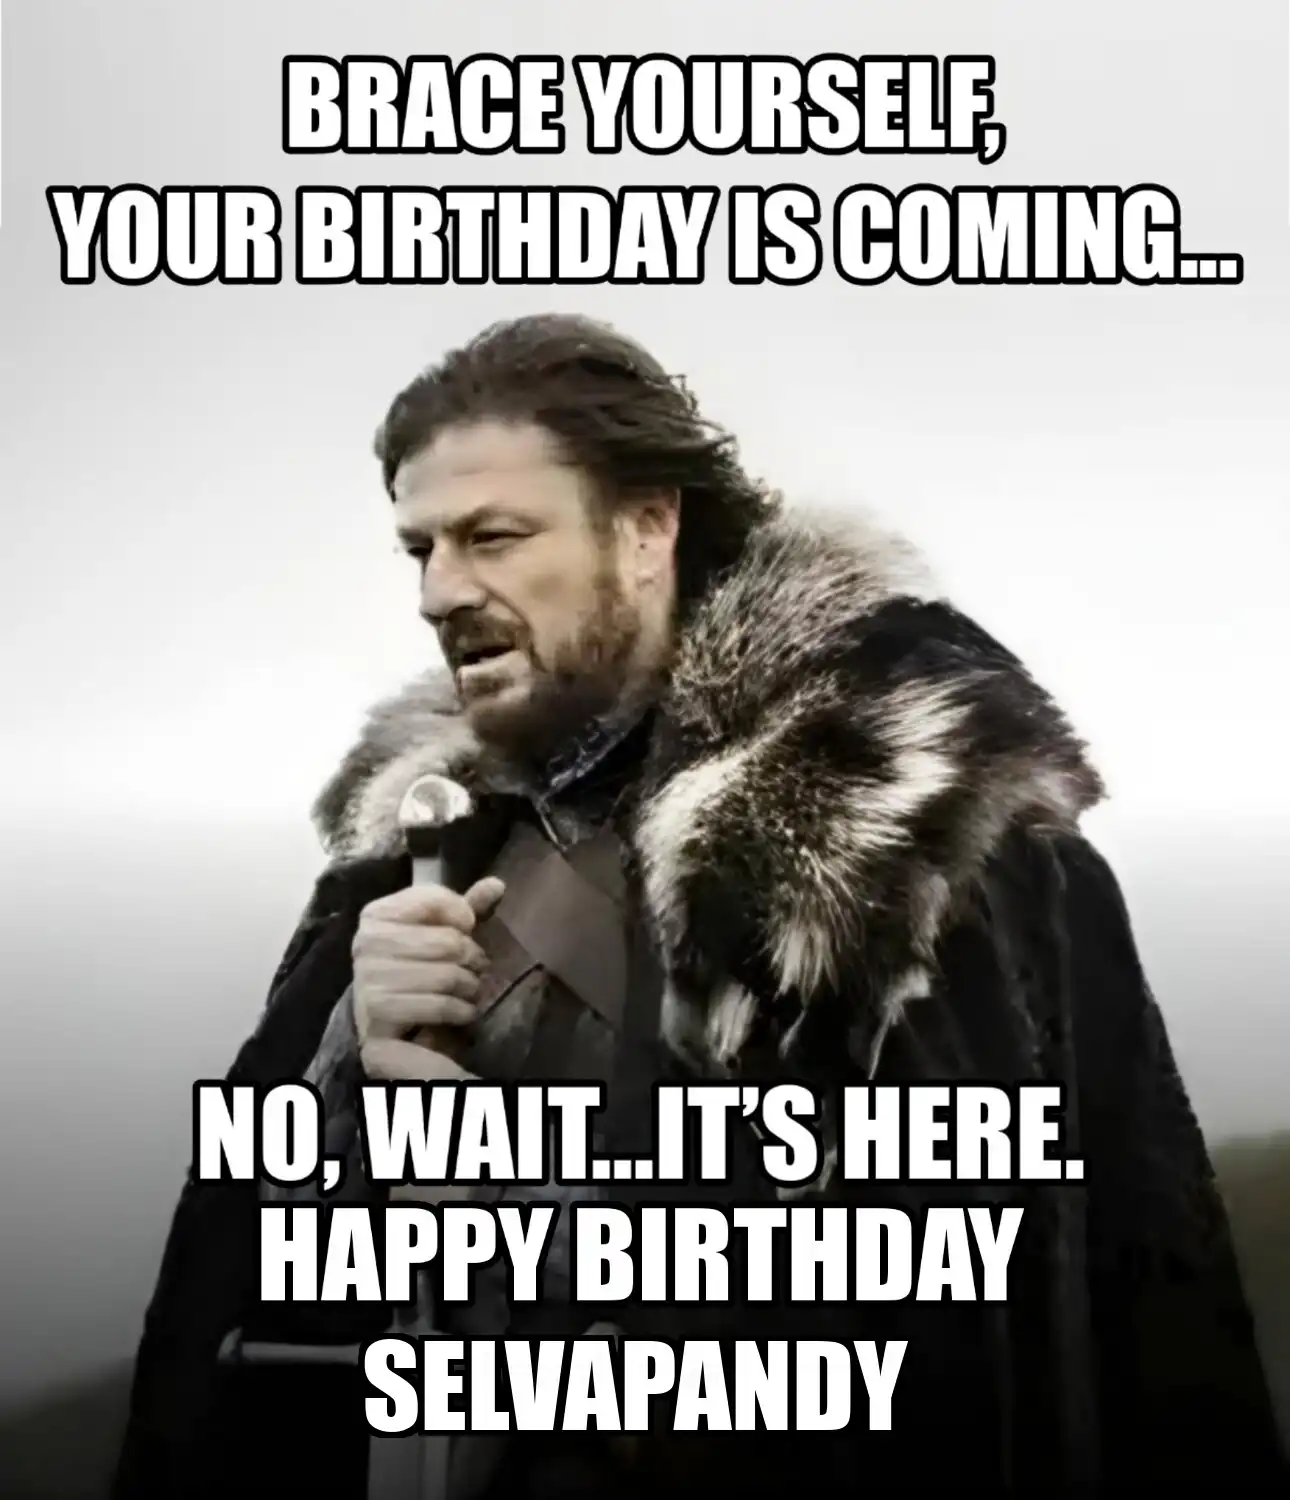 Happy Birthday Selvapandy Brace Yourself Your Birthday Is Coming Meme